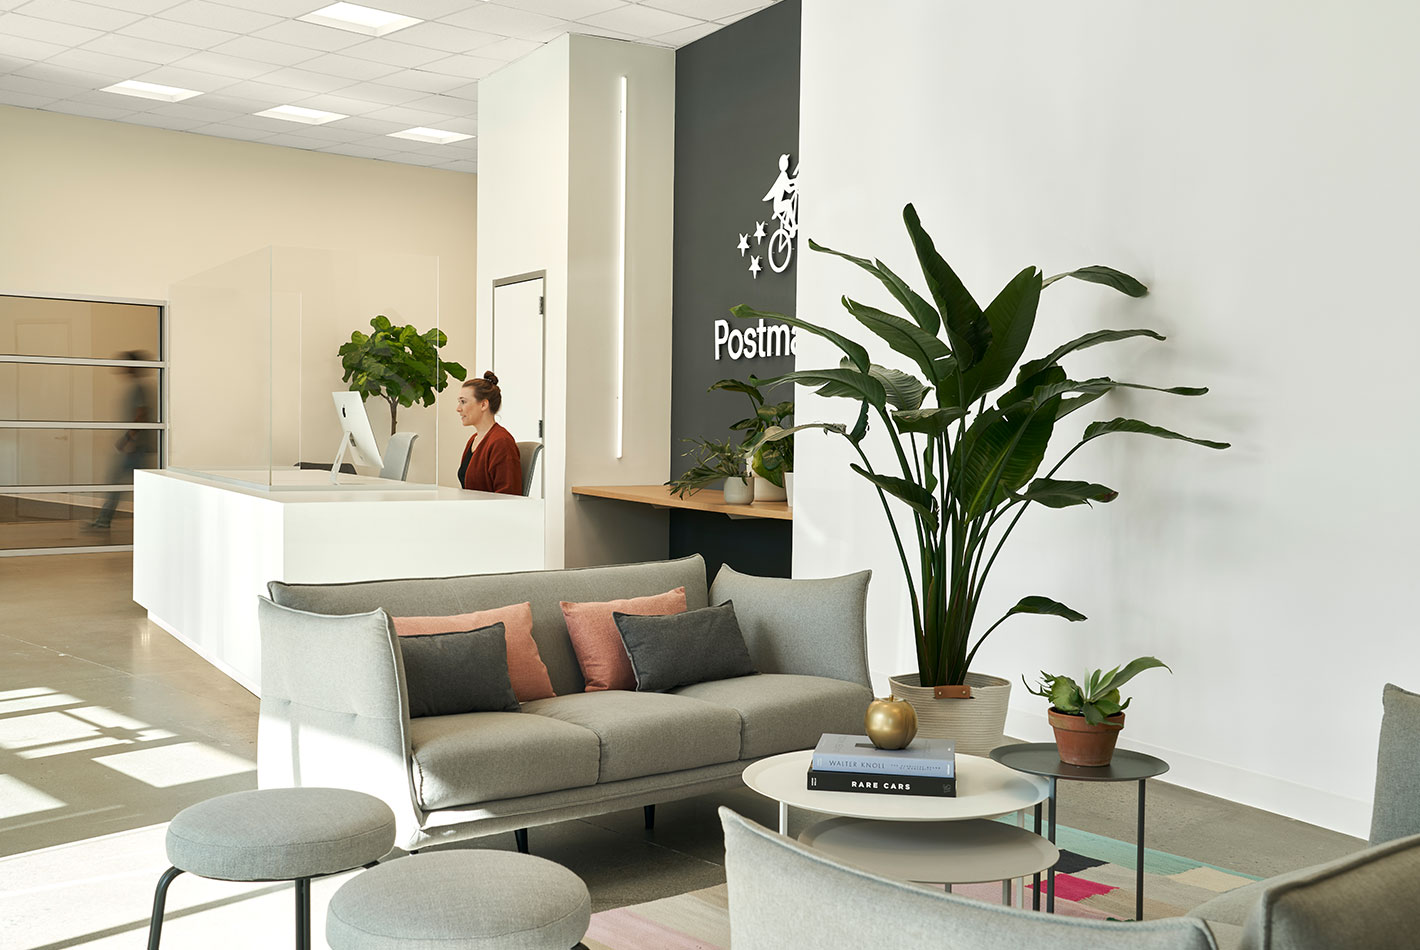 Pale gray upholstered pieces create a waiting area in Postmates Headquarters reception area.